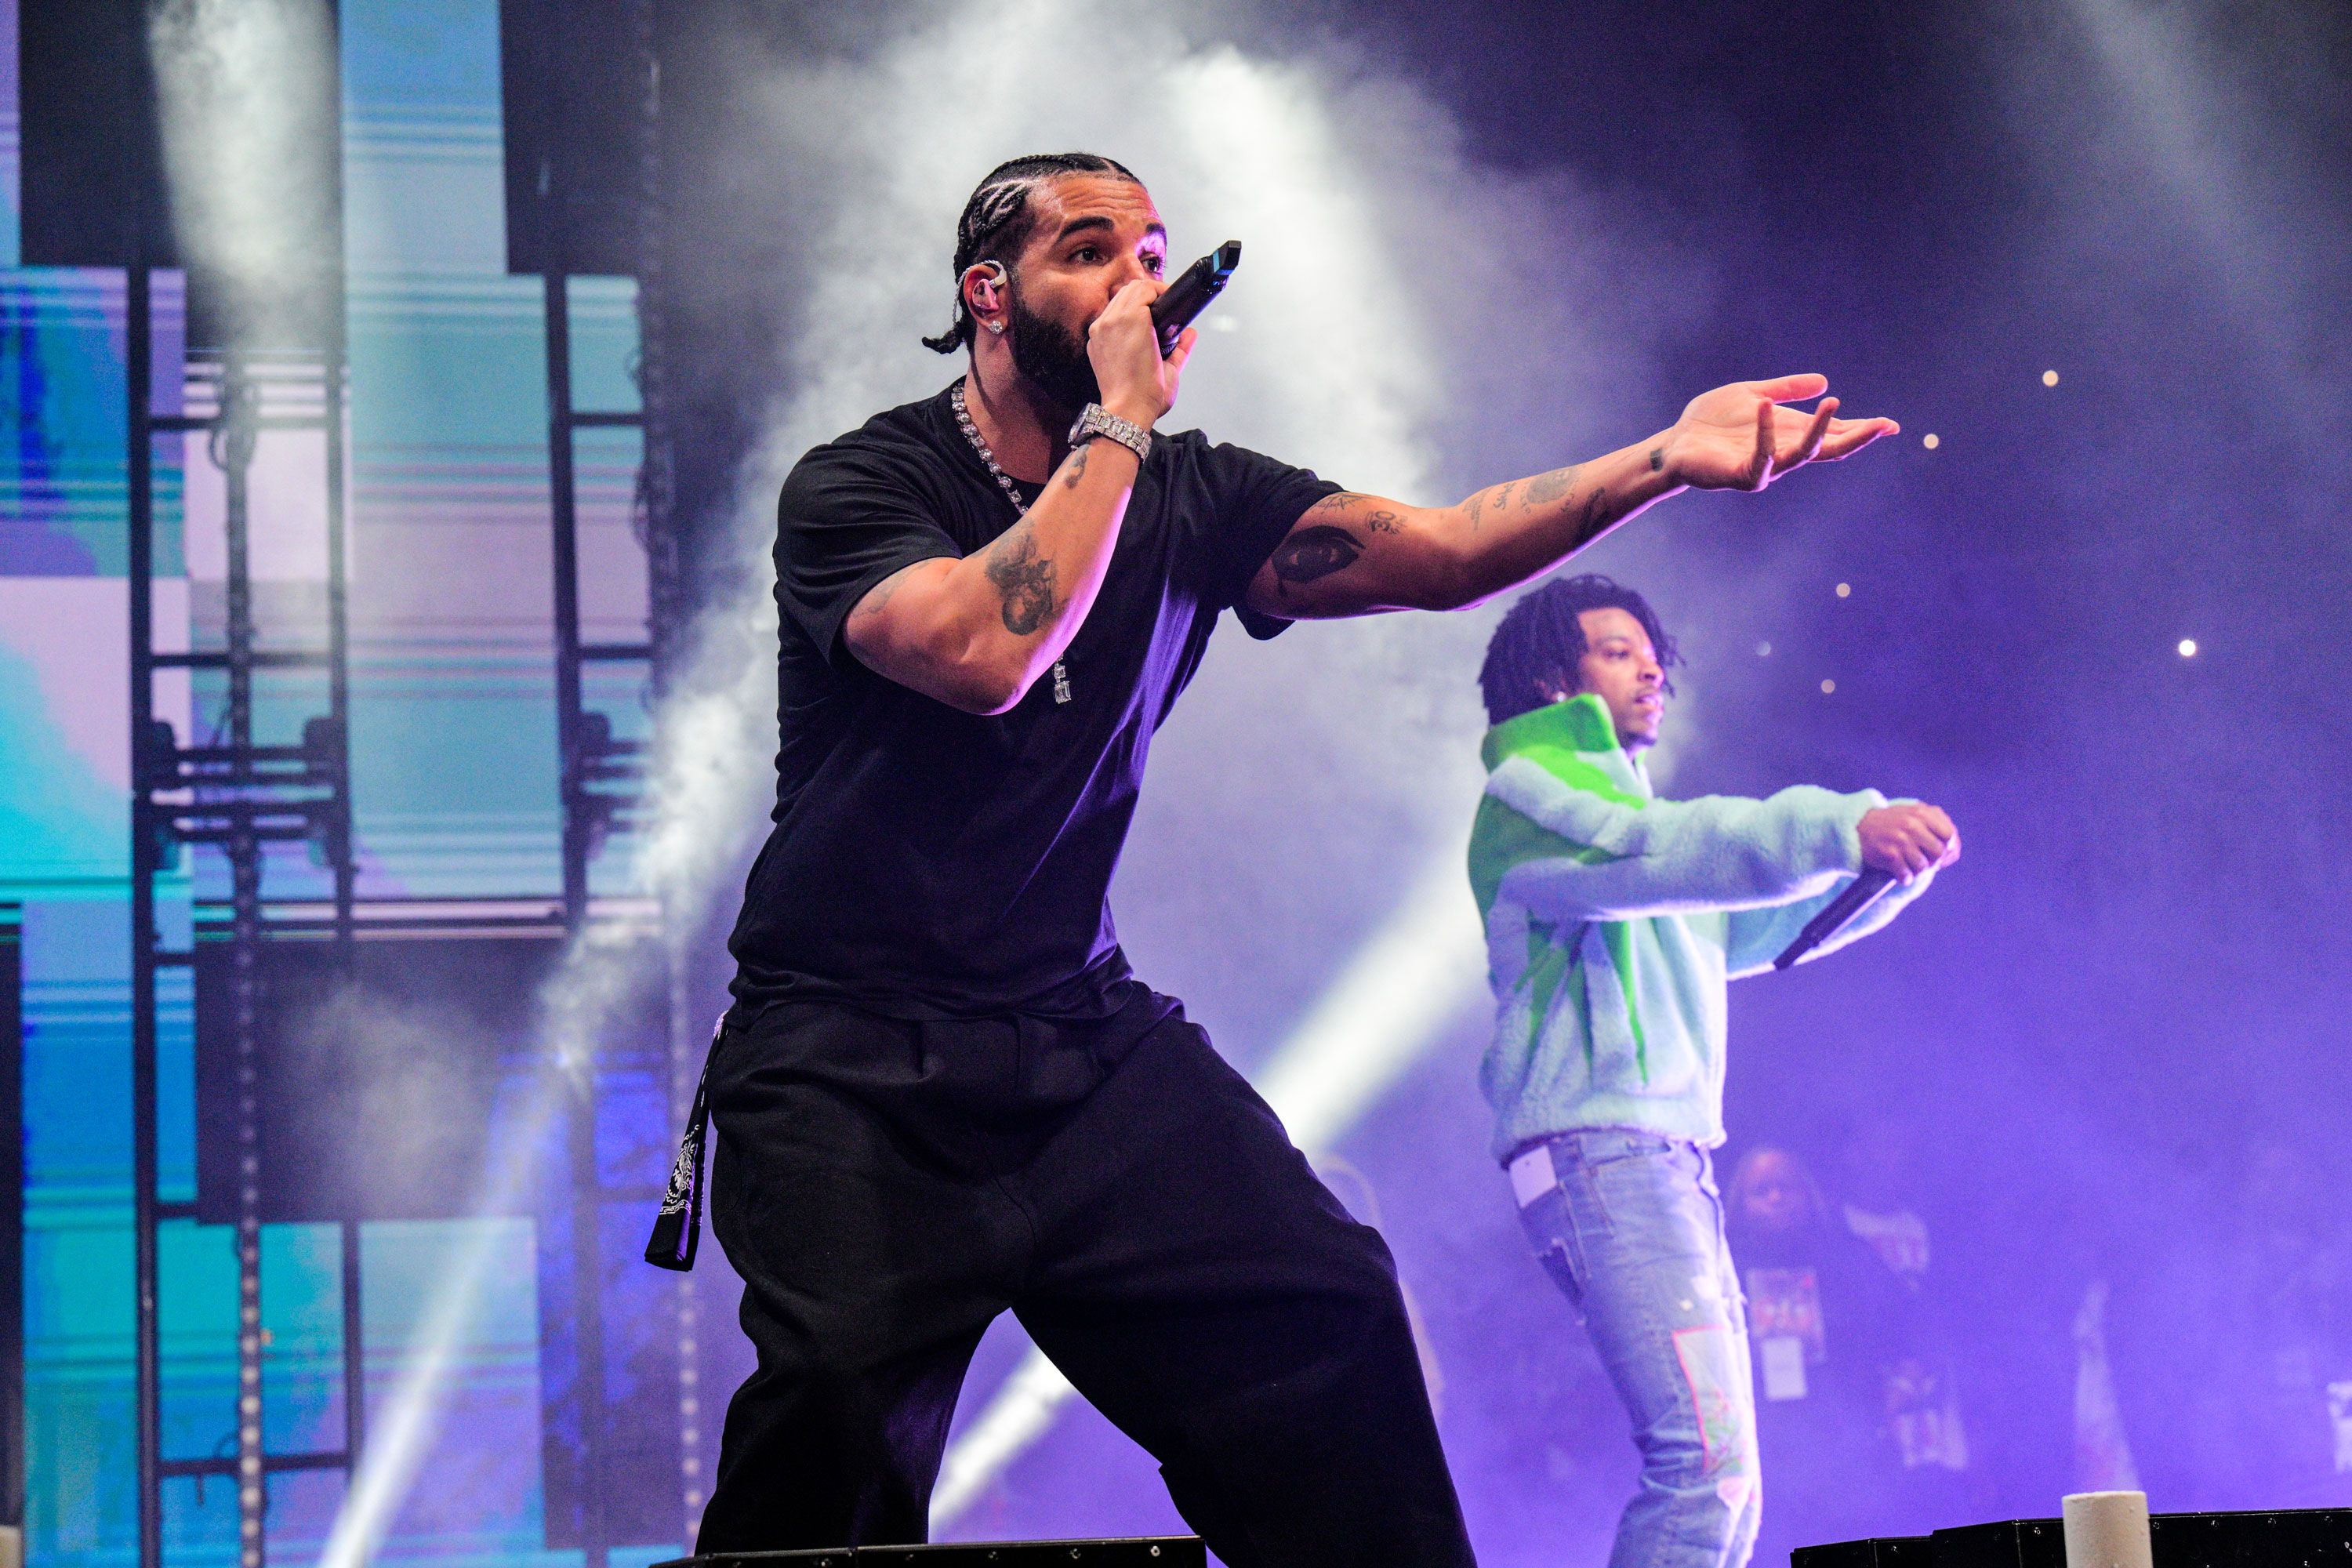 Lil Wayne & Drake Perform Live On The Final Stop Of Their Joint